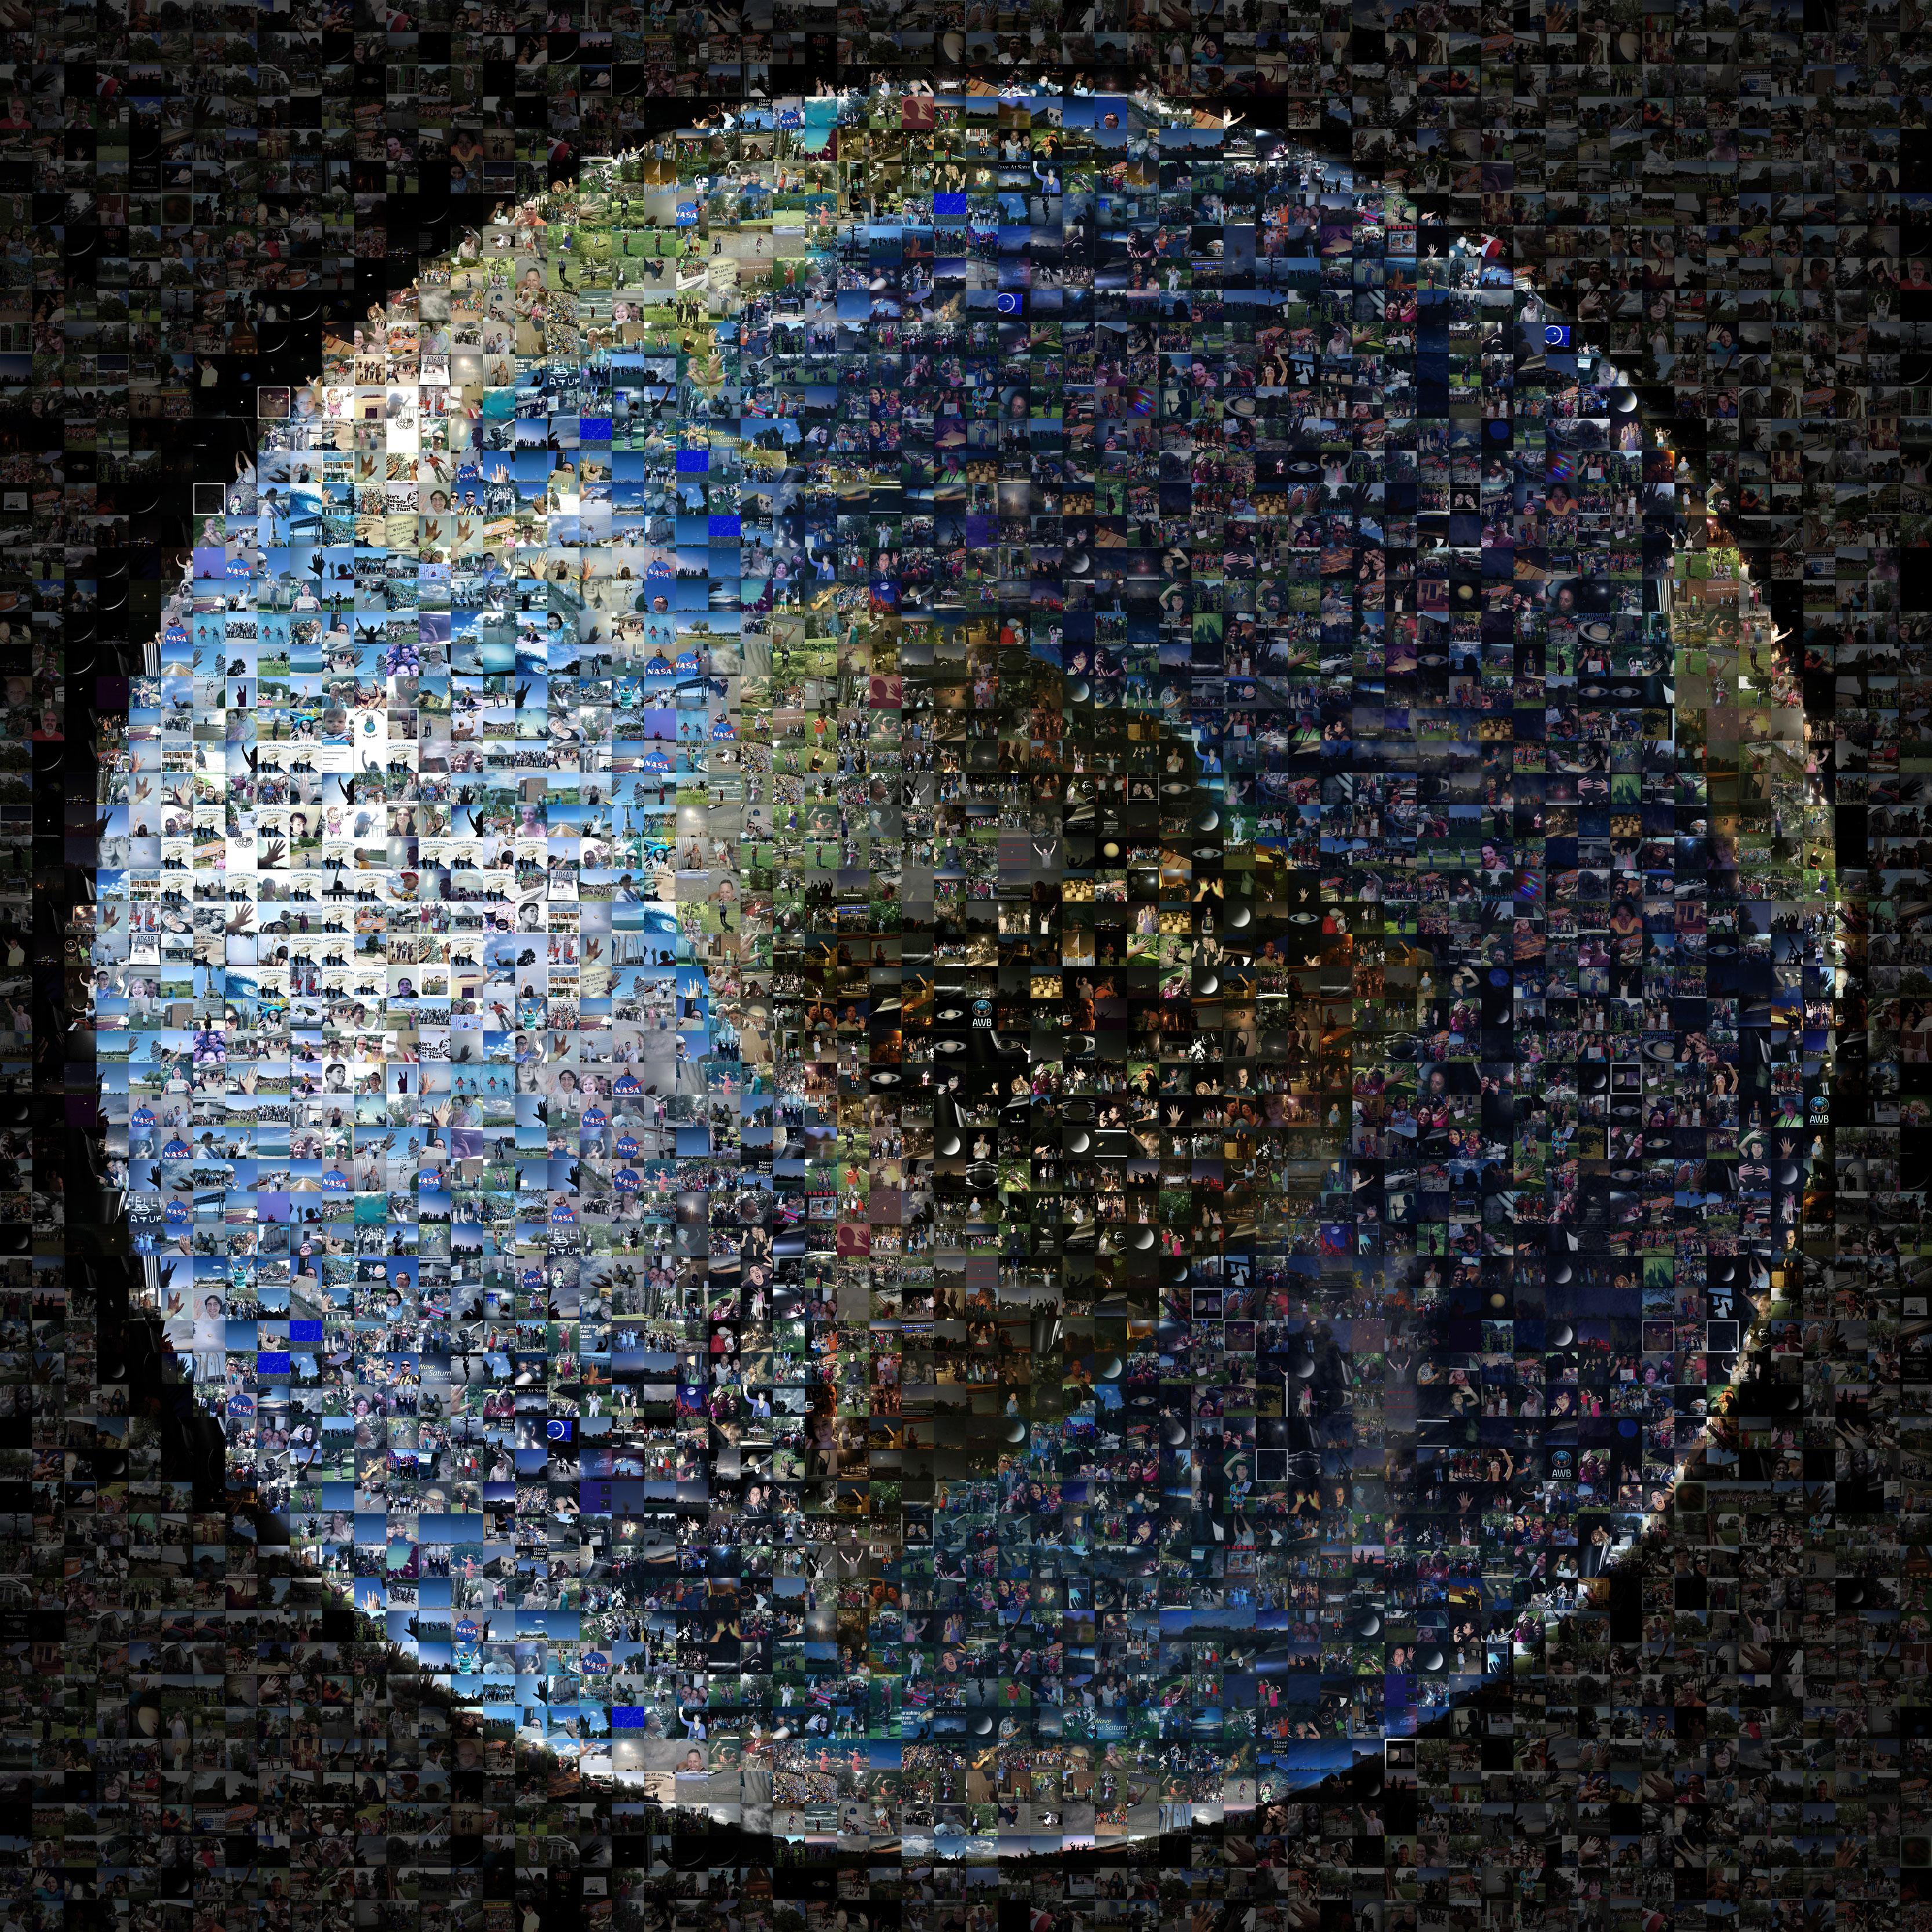 Earth made up by photos of humans